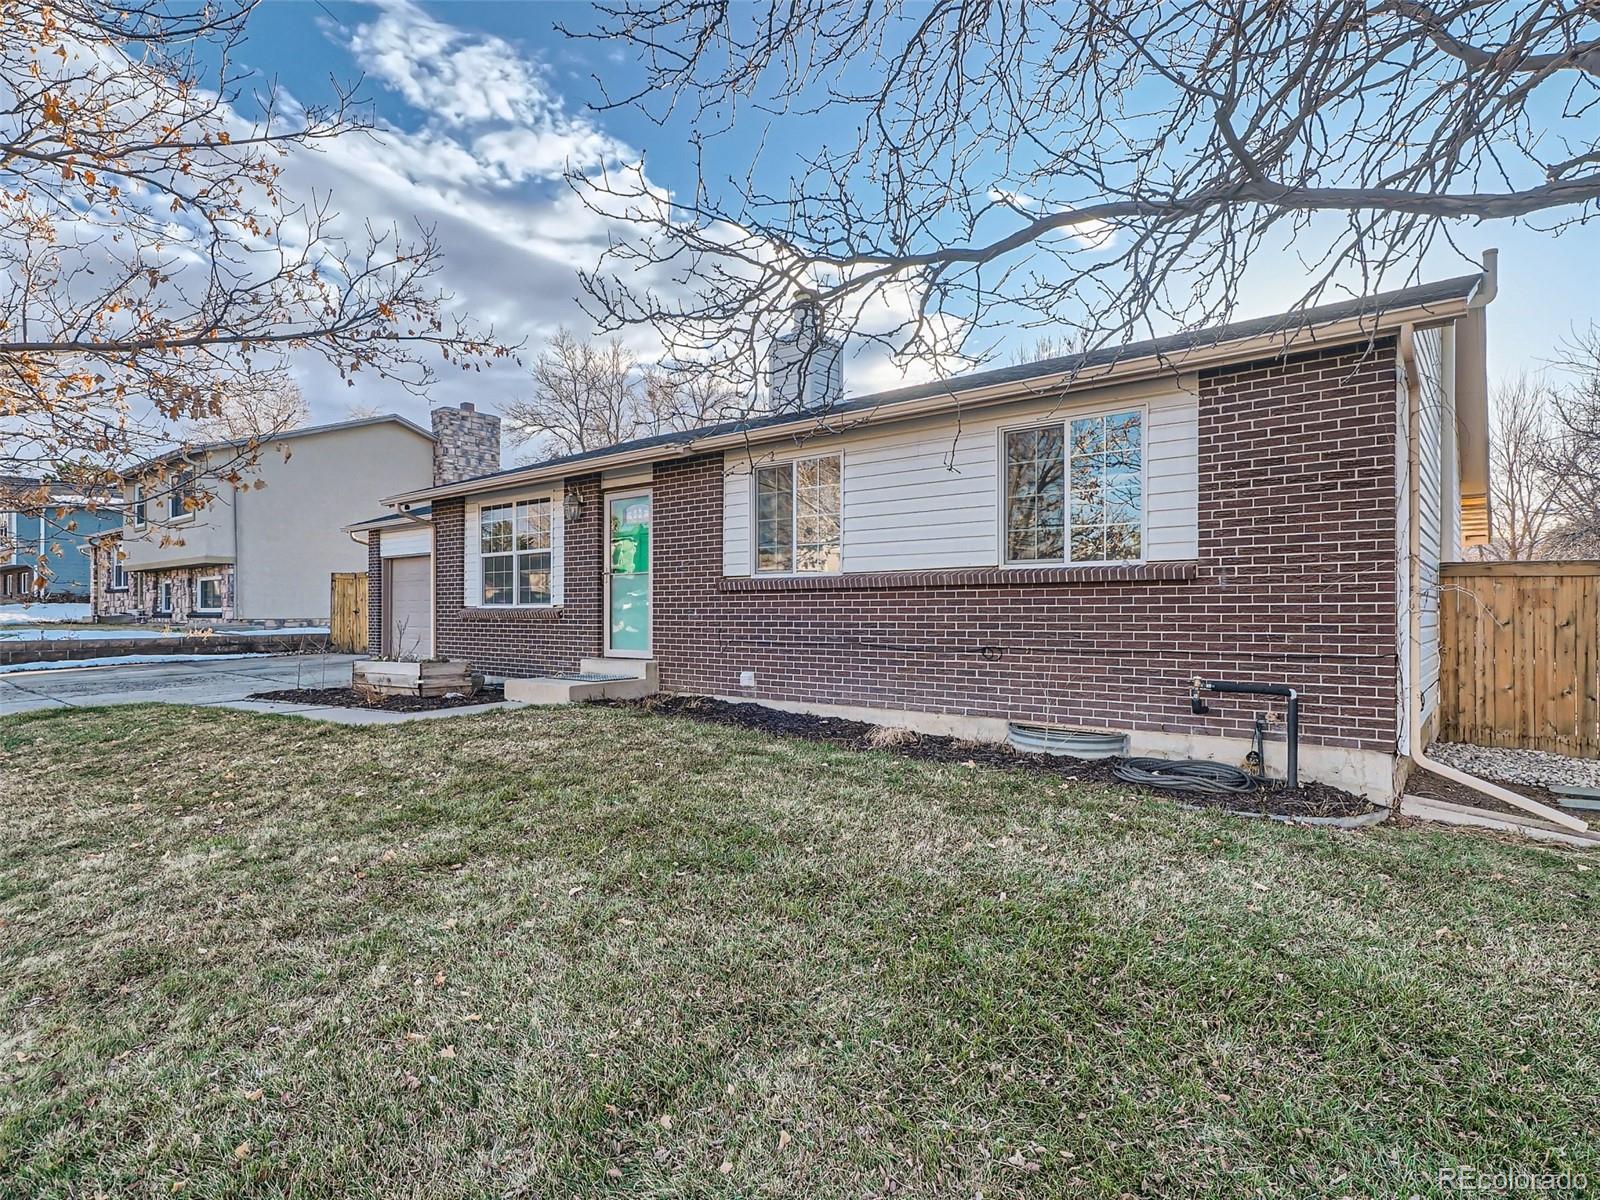 Report Image for 2543 S Crystal Street,Aurora, Colorado